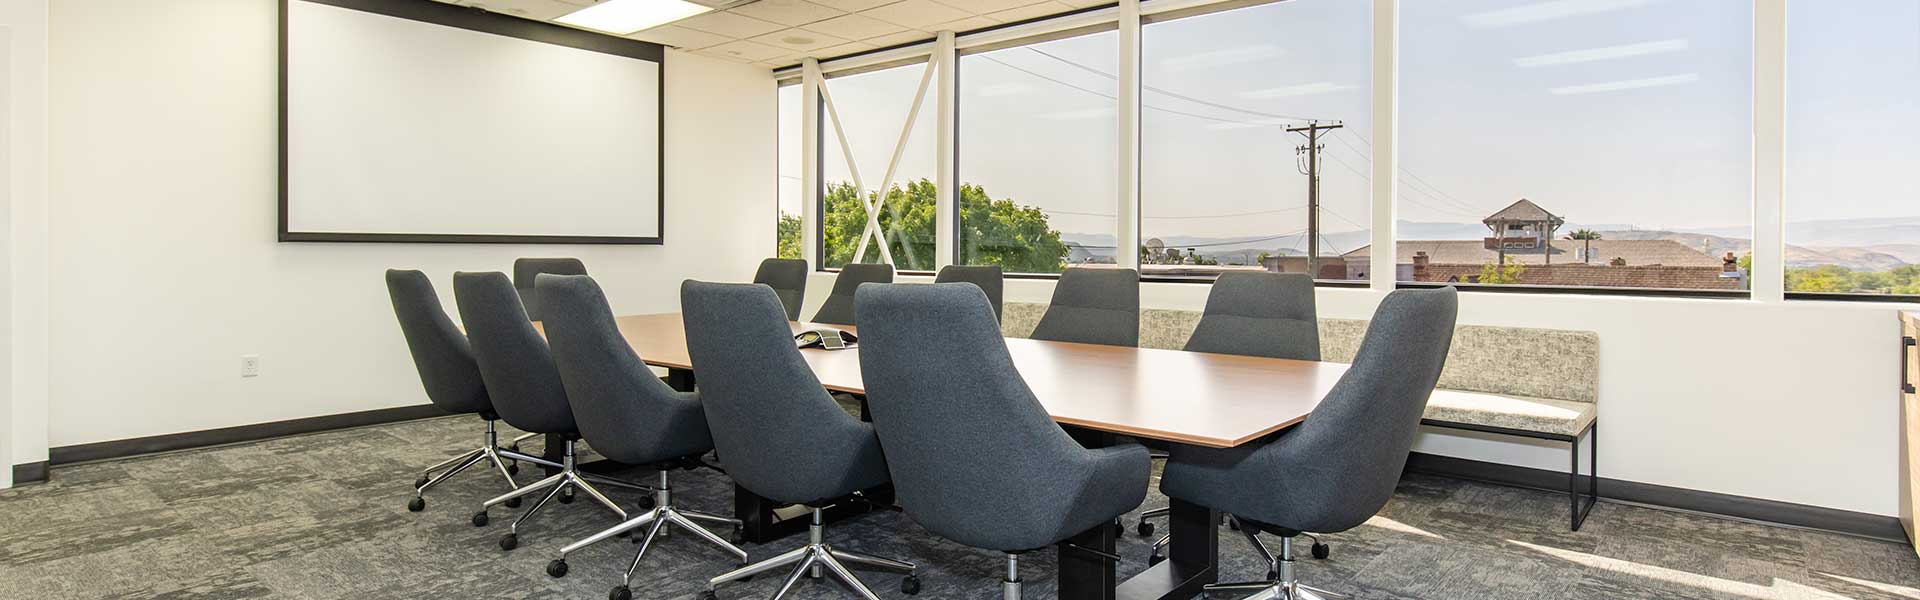 conference room inside NAI Excel building in St George